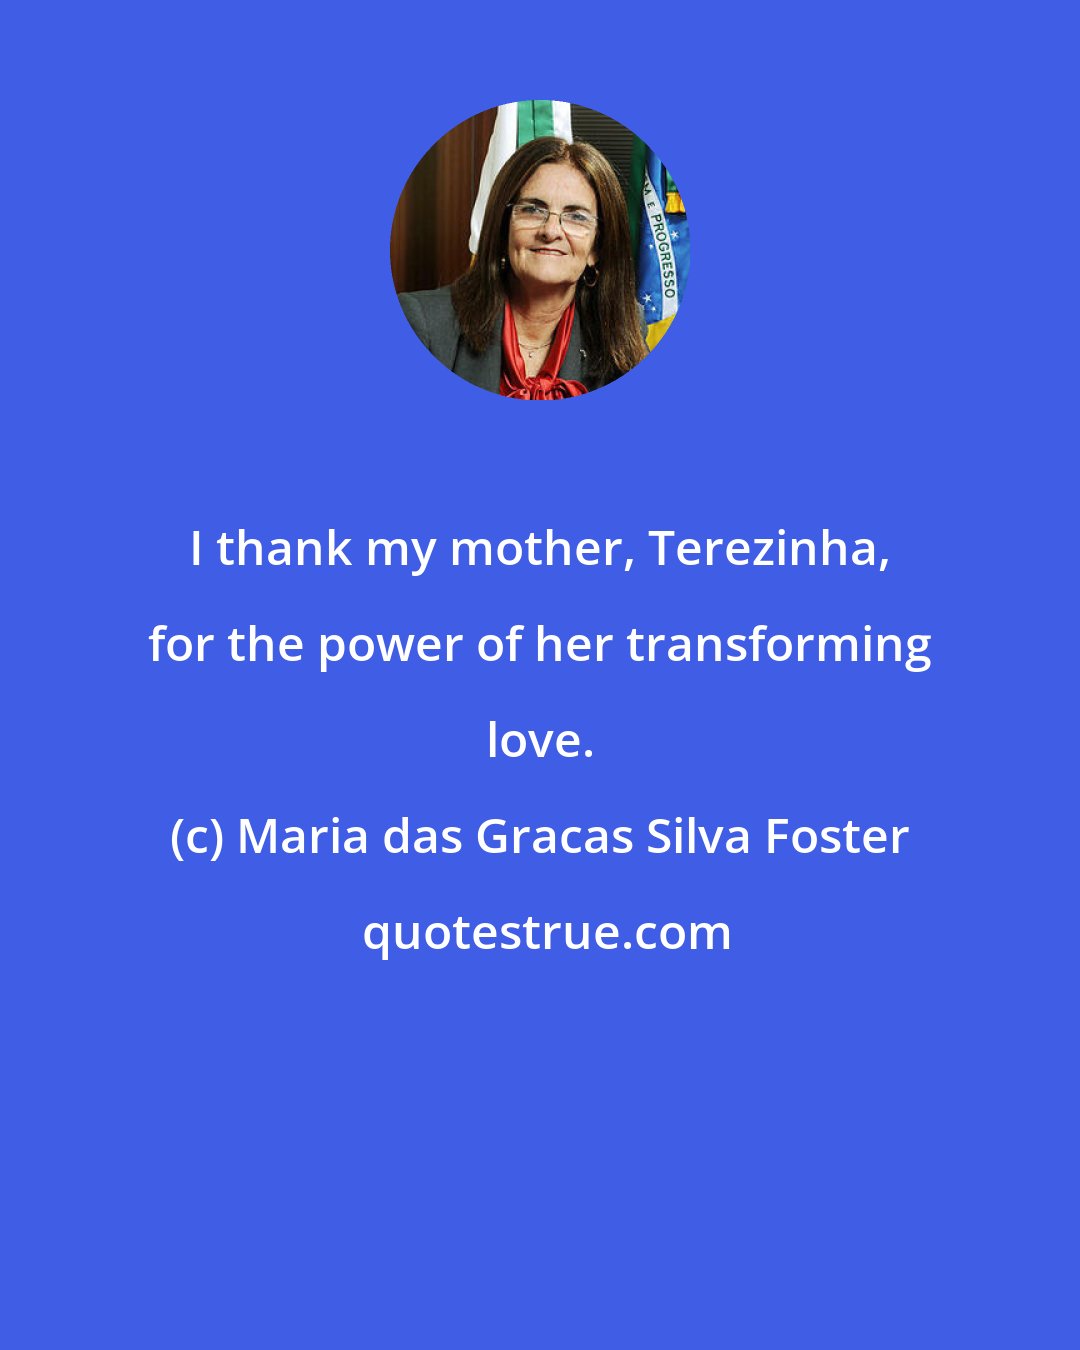 Maria das Gracas Silva Foster: I thank my mother, Terezinha, for the power of her transforming love.